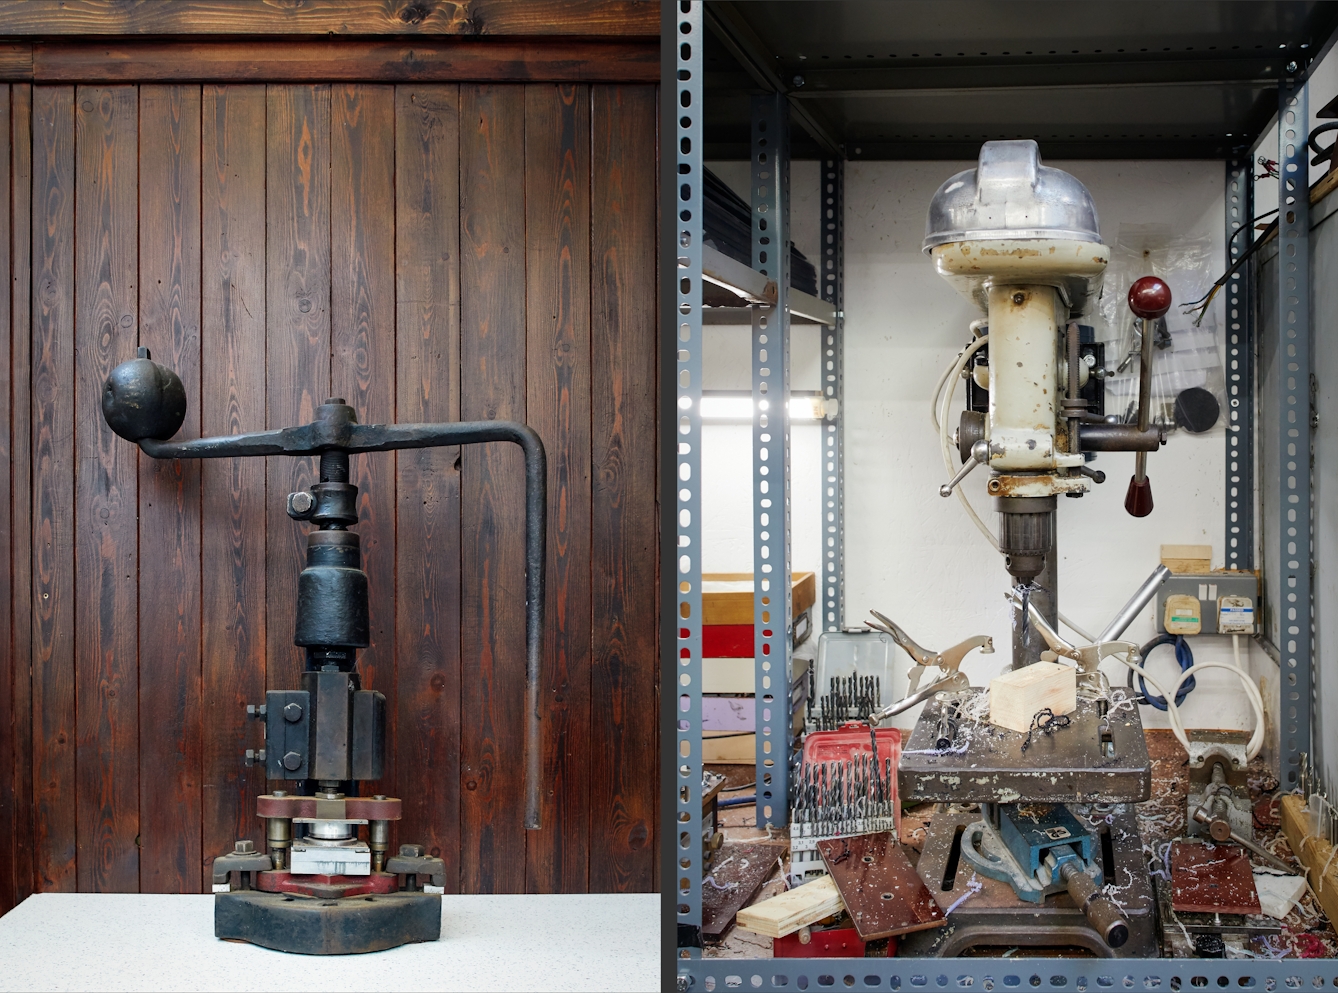 Photographic diptych, both images showing old manufacturing machinery. The image on the left shows a large manual press set against a wooden panelled wall. The image on the right shows a pillar drill surrounded by drill bits, clamps and plastic shavings.